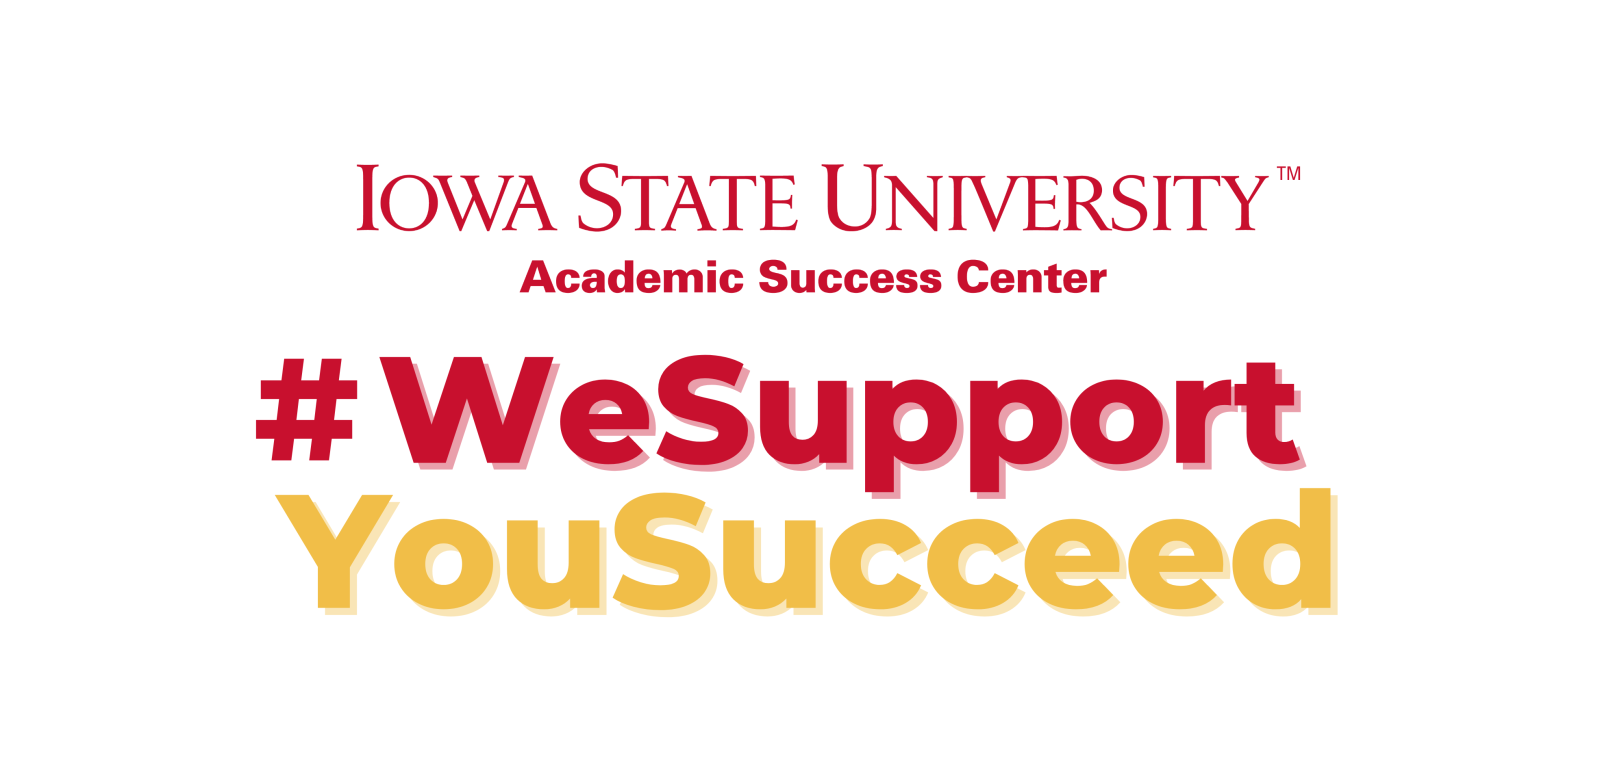 iowa state university Academic Success Center: We support you succeed